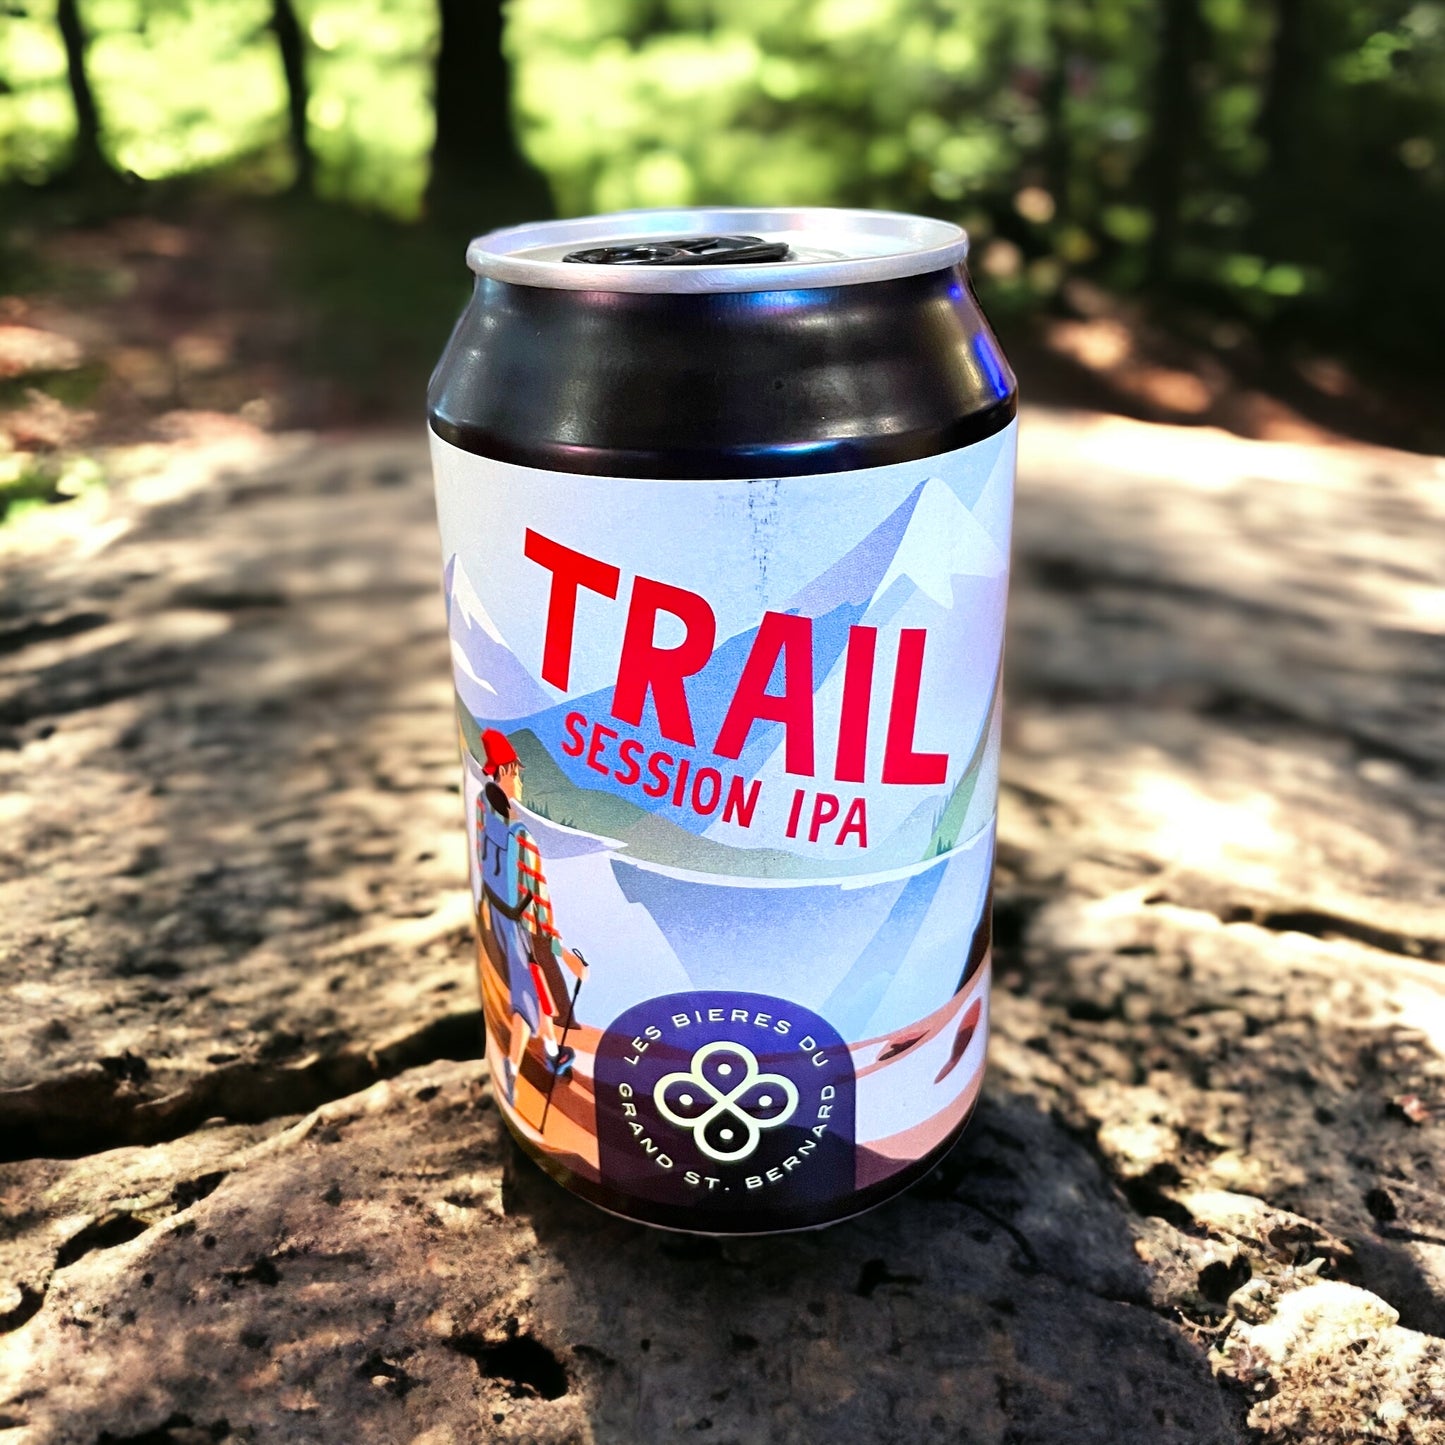 Trail Session IPA beer